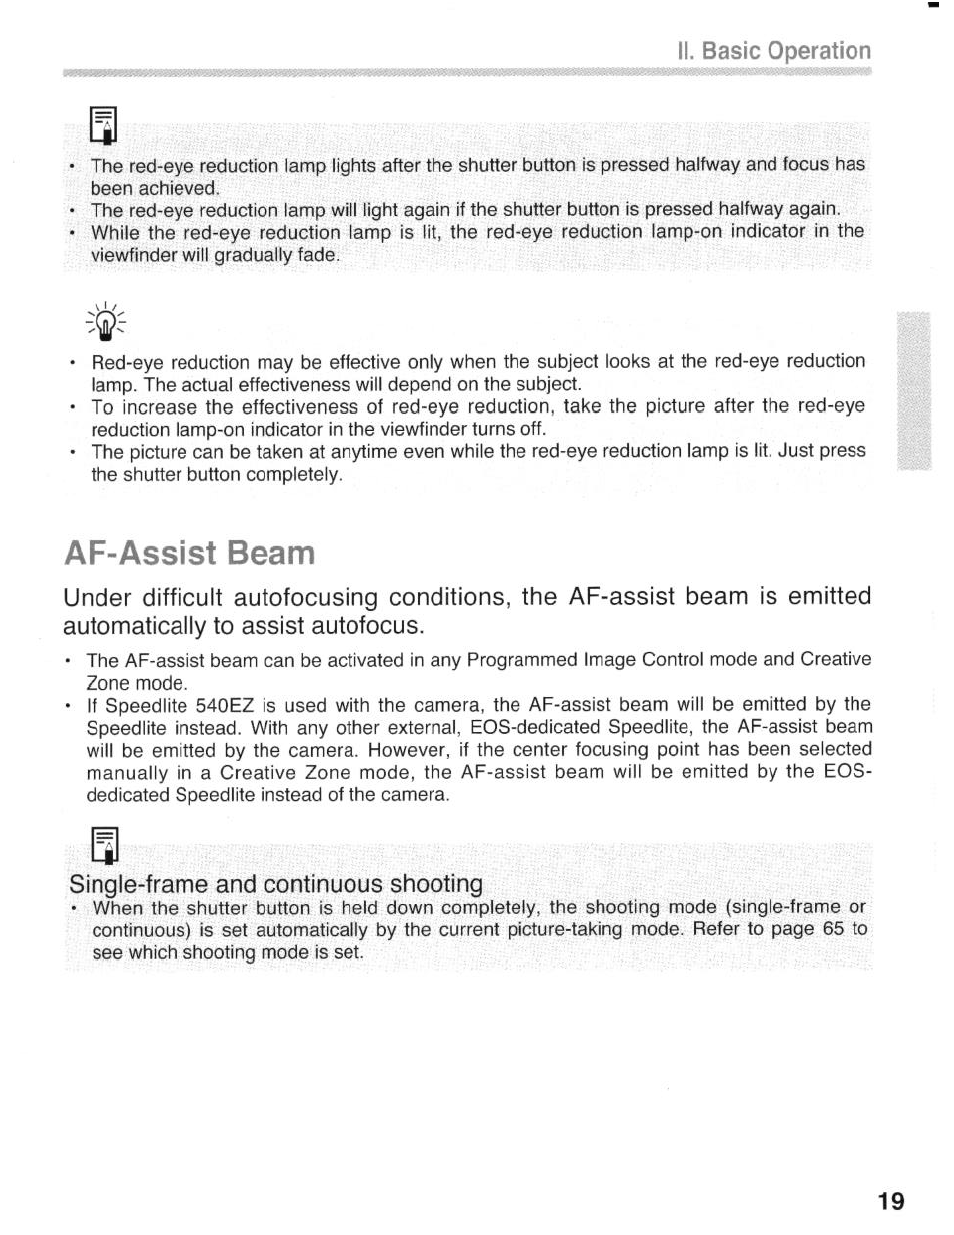 Af-assist beam, Automatically to assist autofocus, Single-frame and continuous shooting | Canon eos rebel g User Manual | Page 19 / 68